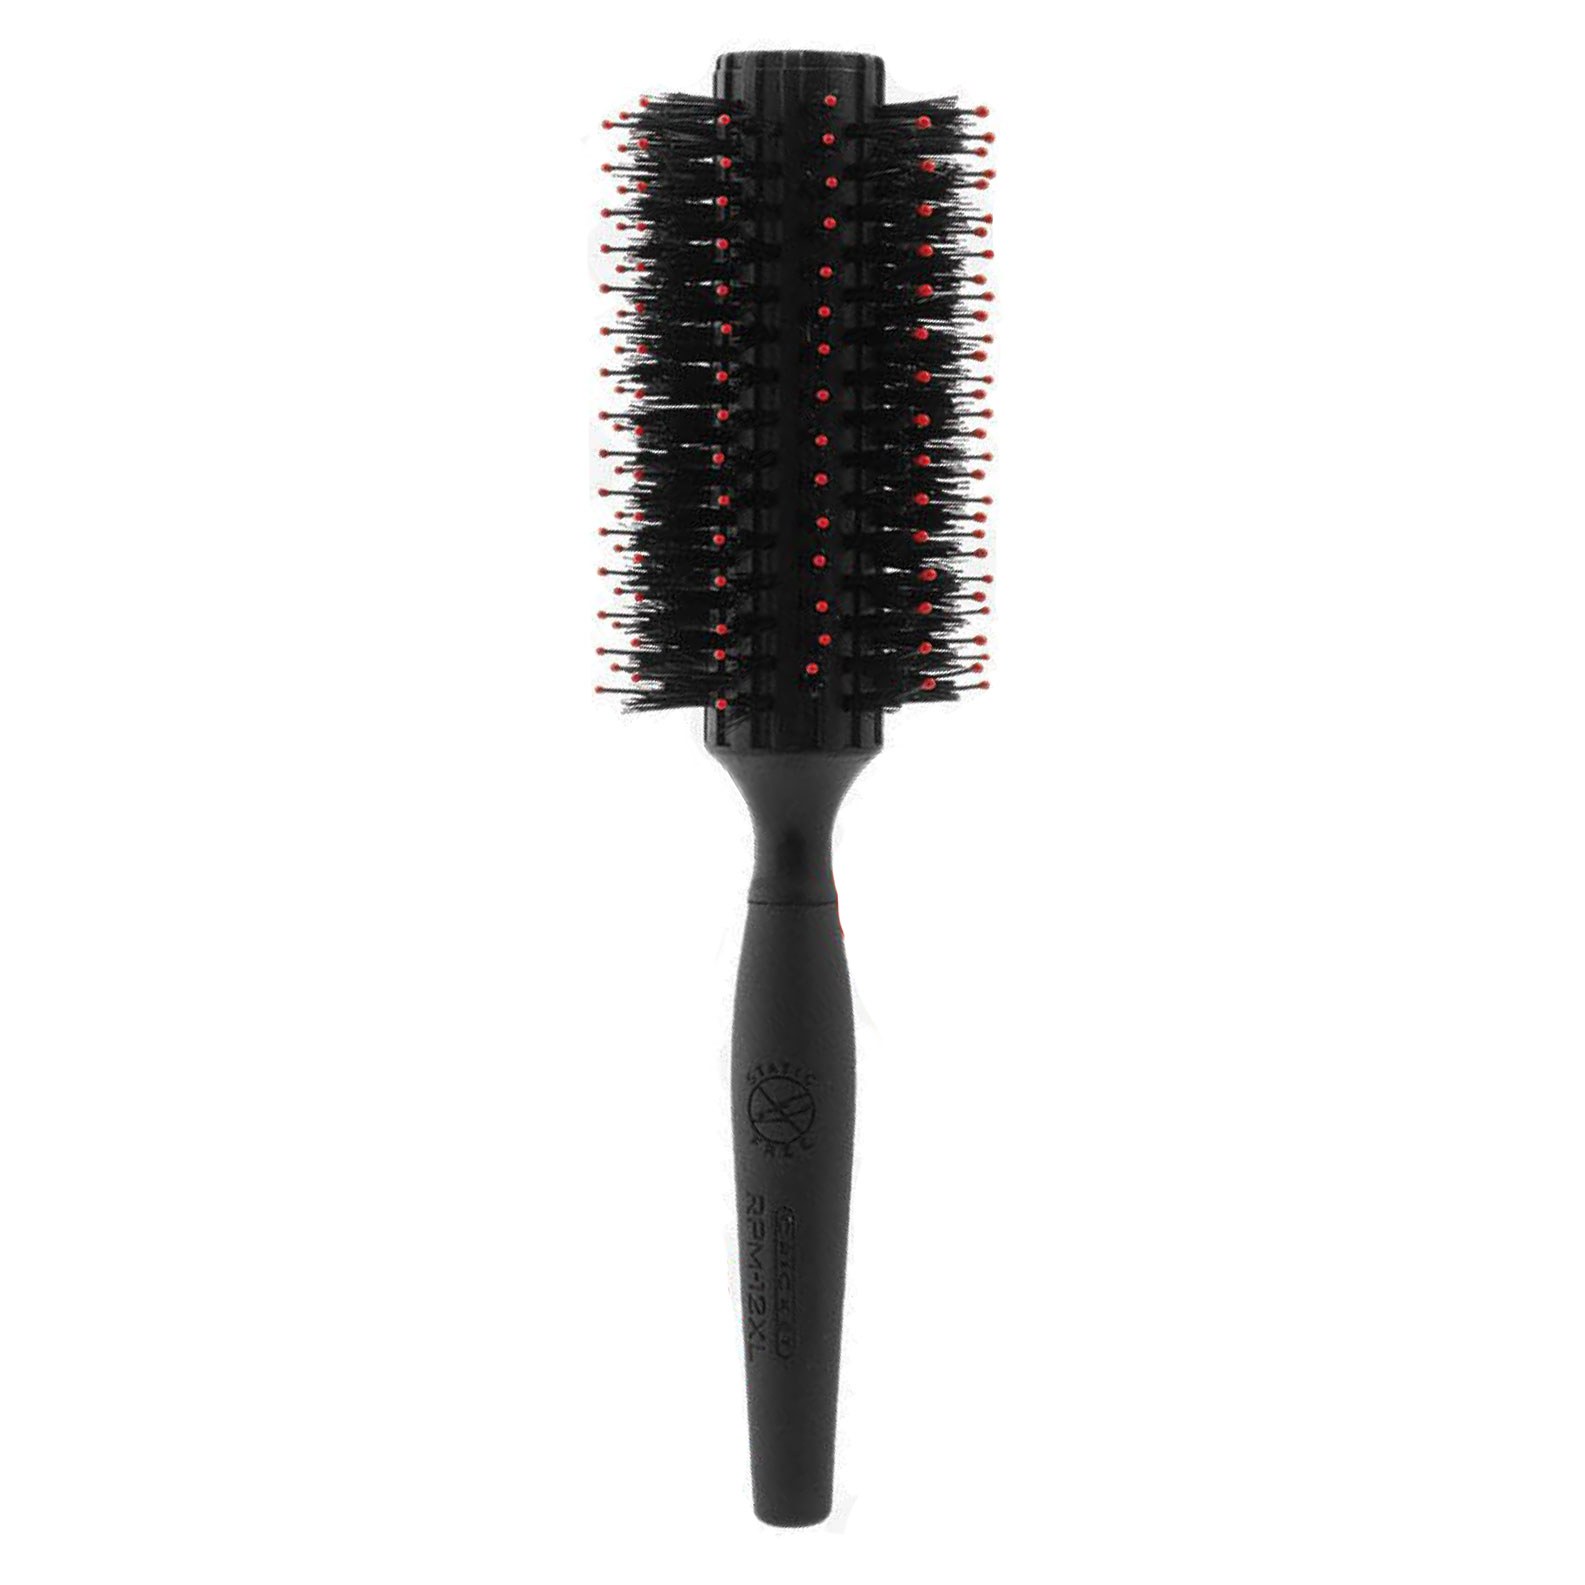 Cricket BRUSHES: Static Free RFM-12XL Deluxe Boar Brush